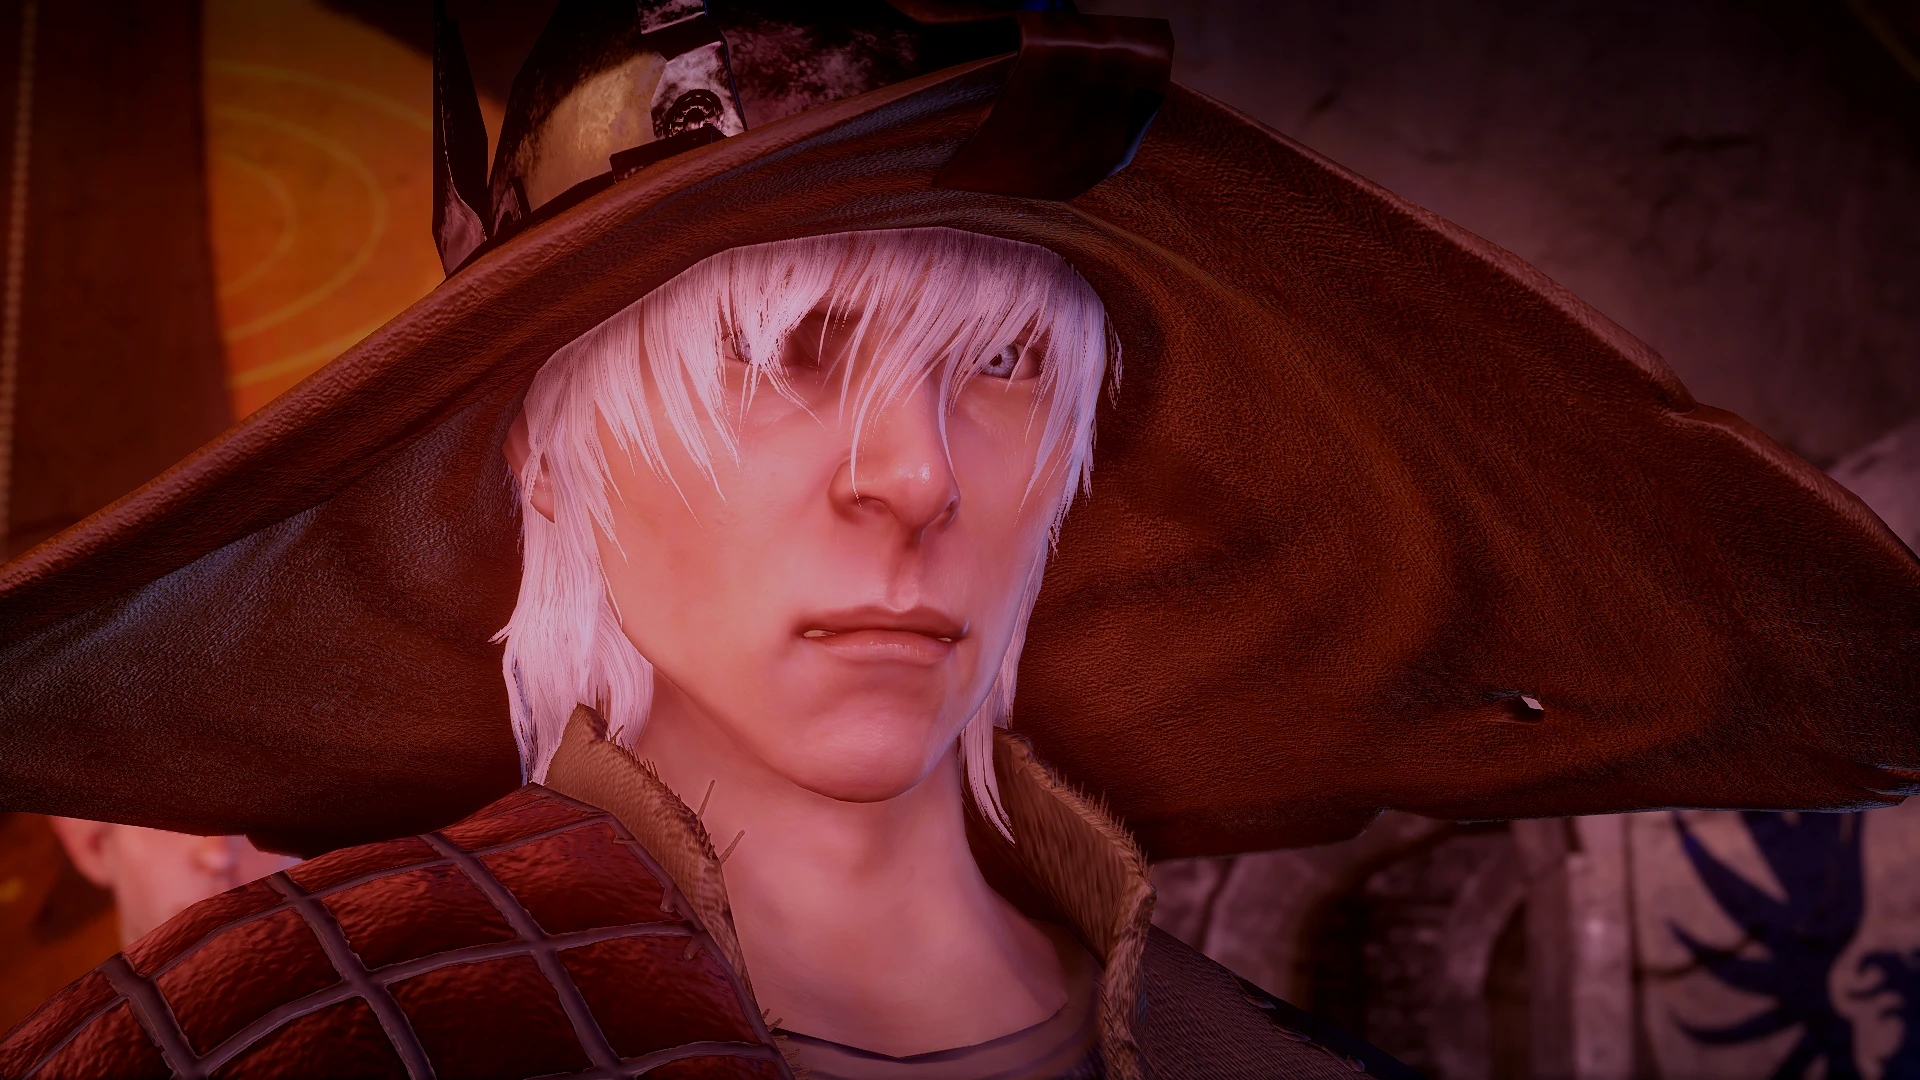 dragon age inquisition mod manager